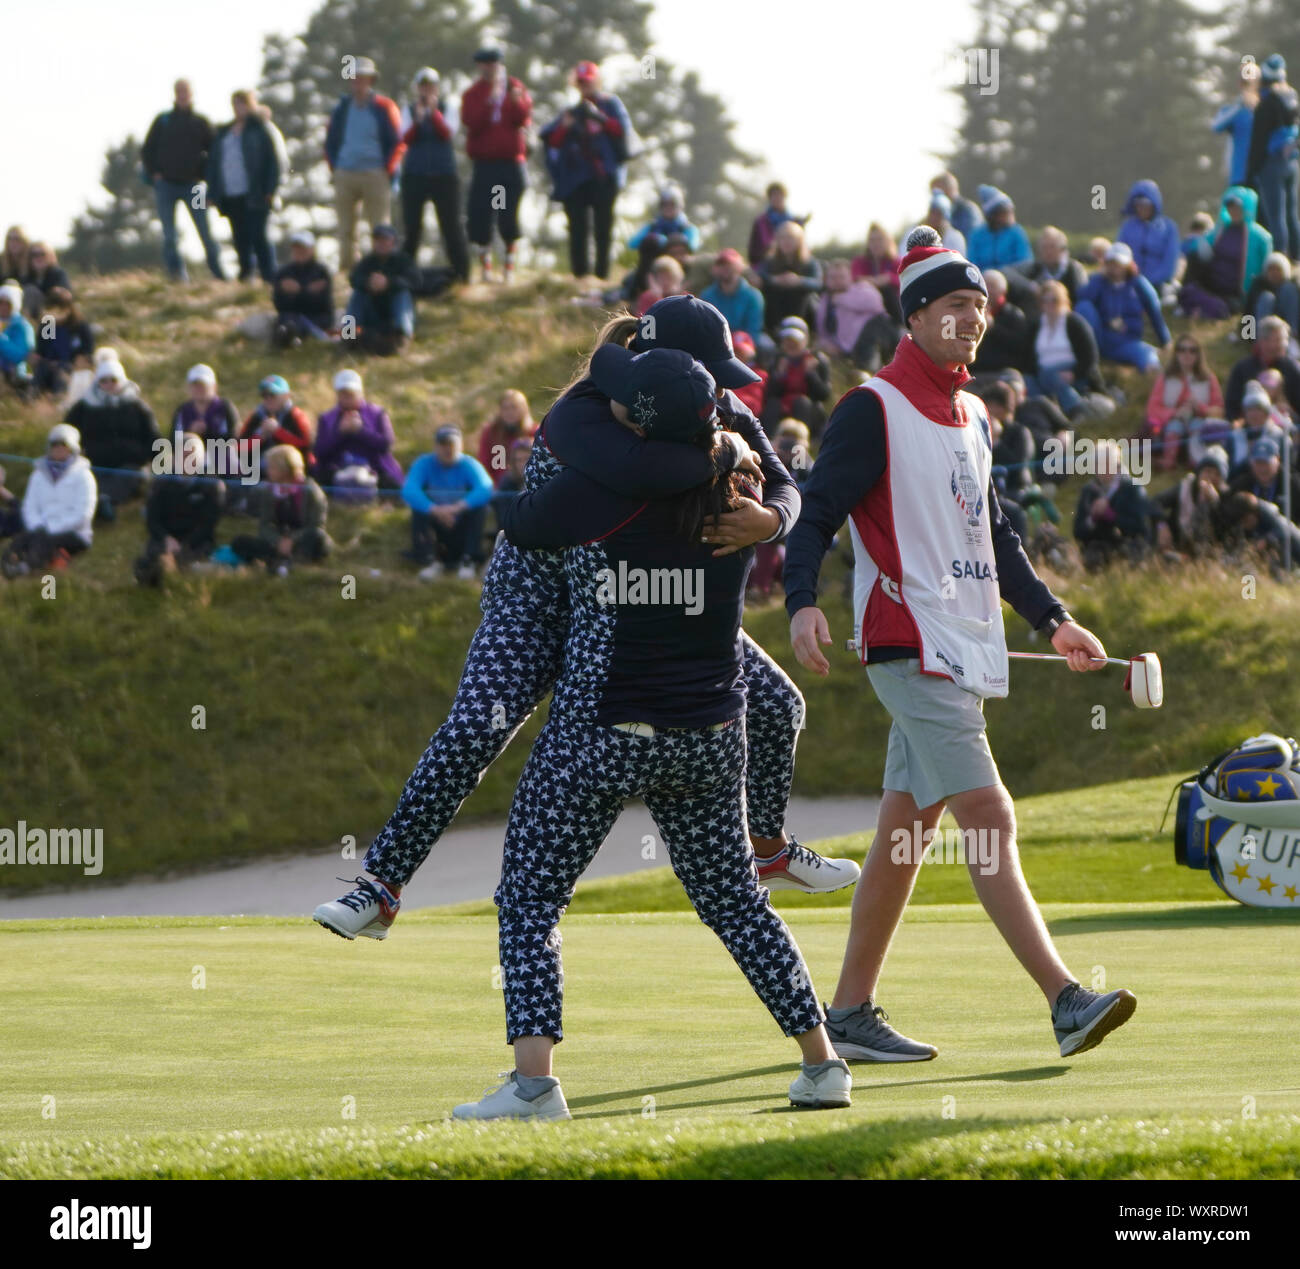 Solheim Cup 2019 at Centenary Course at Gleneagles in Scotland, UK. Lizette Salas of USA  is congratulated by Angel Lin (r) on 18th green after winning match. Stock Photo